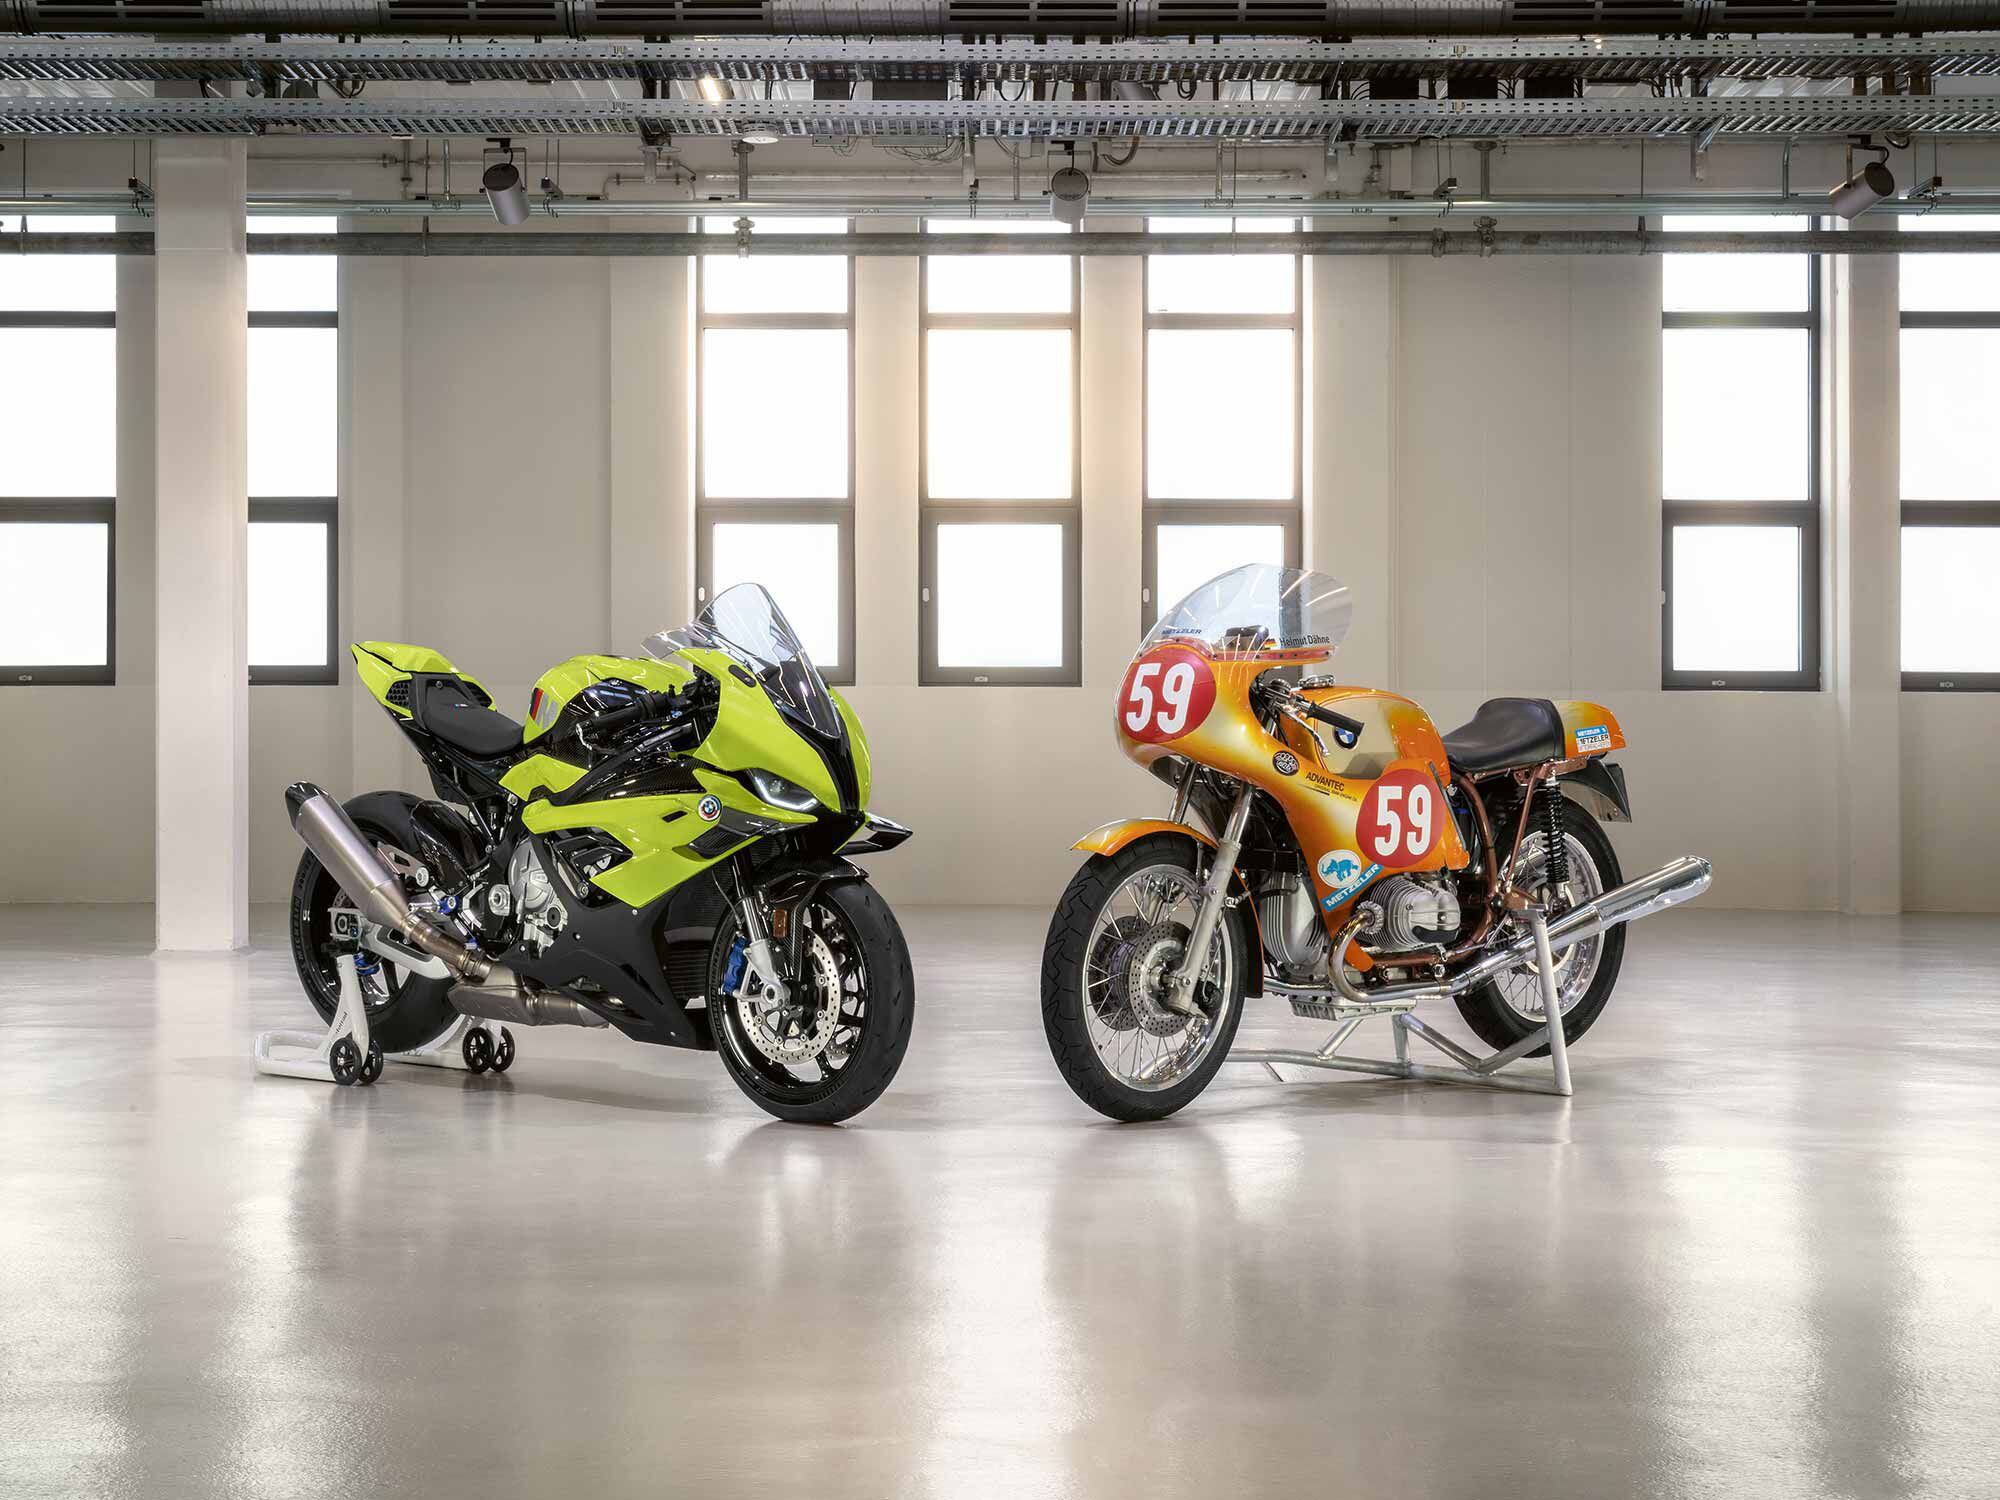 What a difference 37 years makes. The M RR 50 Years M Anniversary model with Helmut Dähne and Hans-Otto Butenuth’s production TT <a href="https://www.motorcyclistonline.com/1974-bmw-r90s-archive/" target="_blank">R90S</a>.